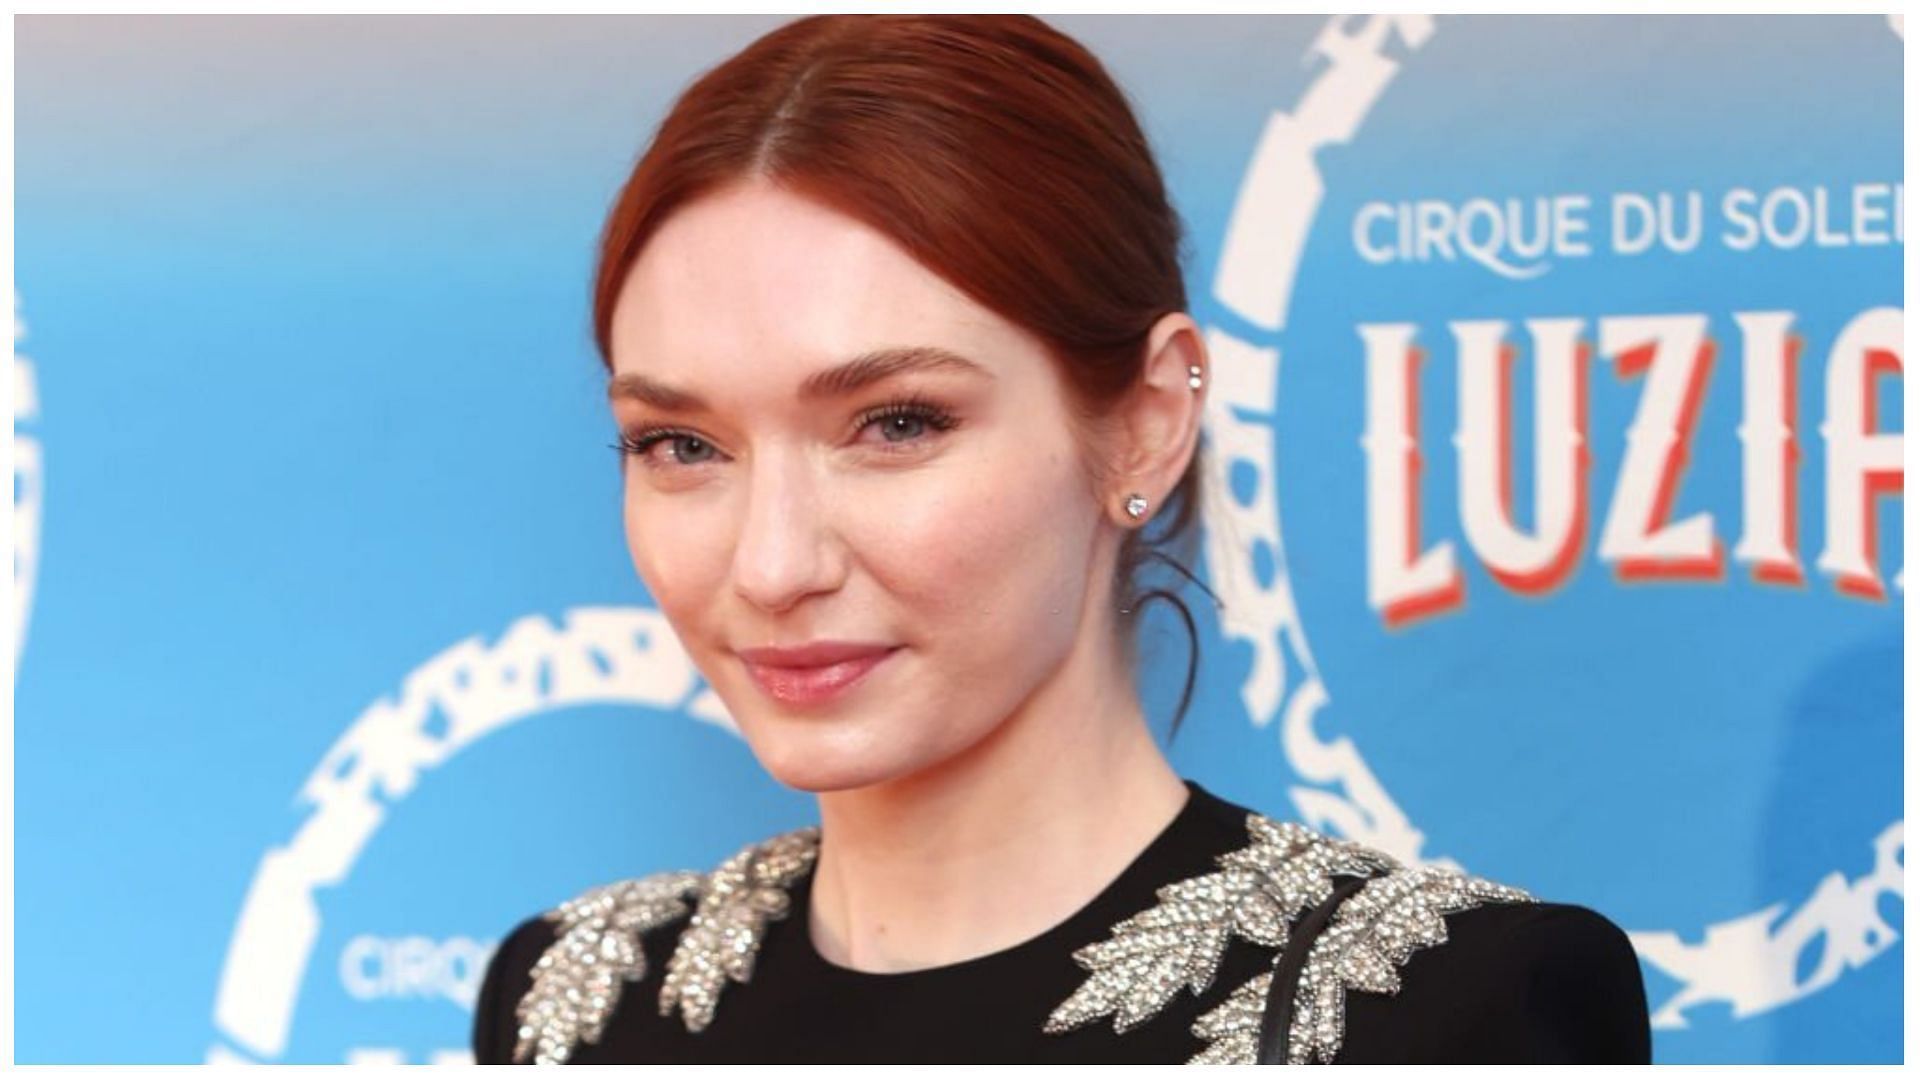 Eleanor Tomlinson has appeared in many movies and TV series (Image via Mike Marsland/Getty Images)